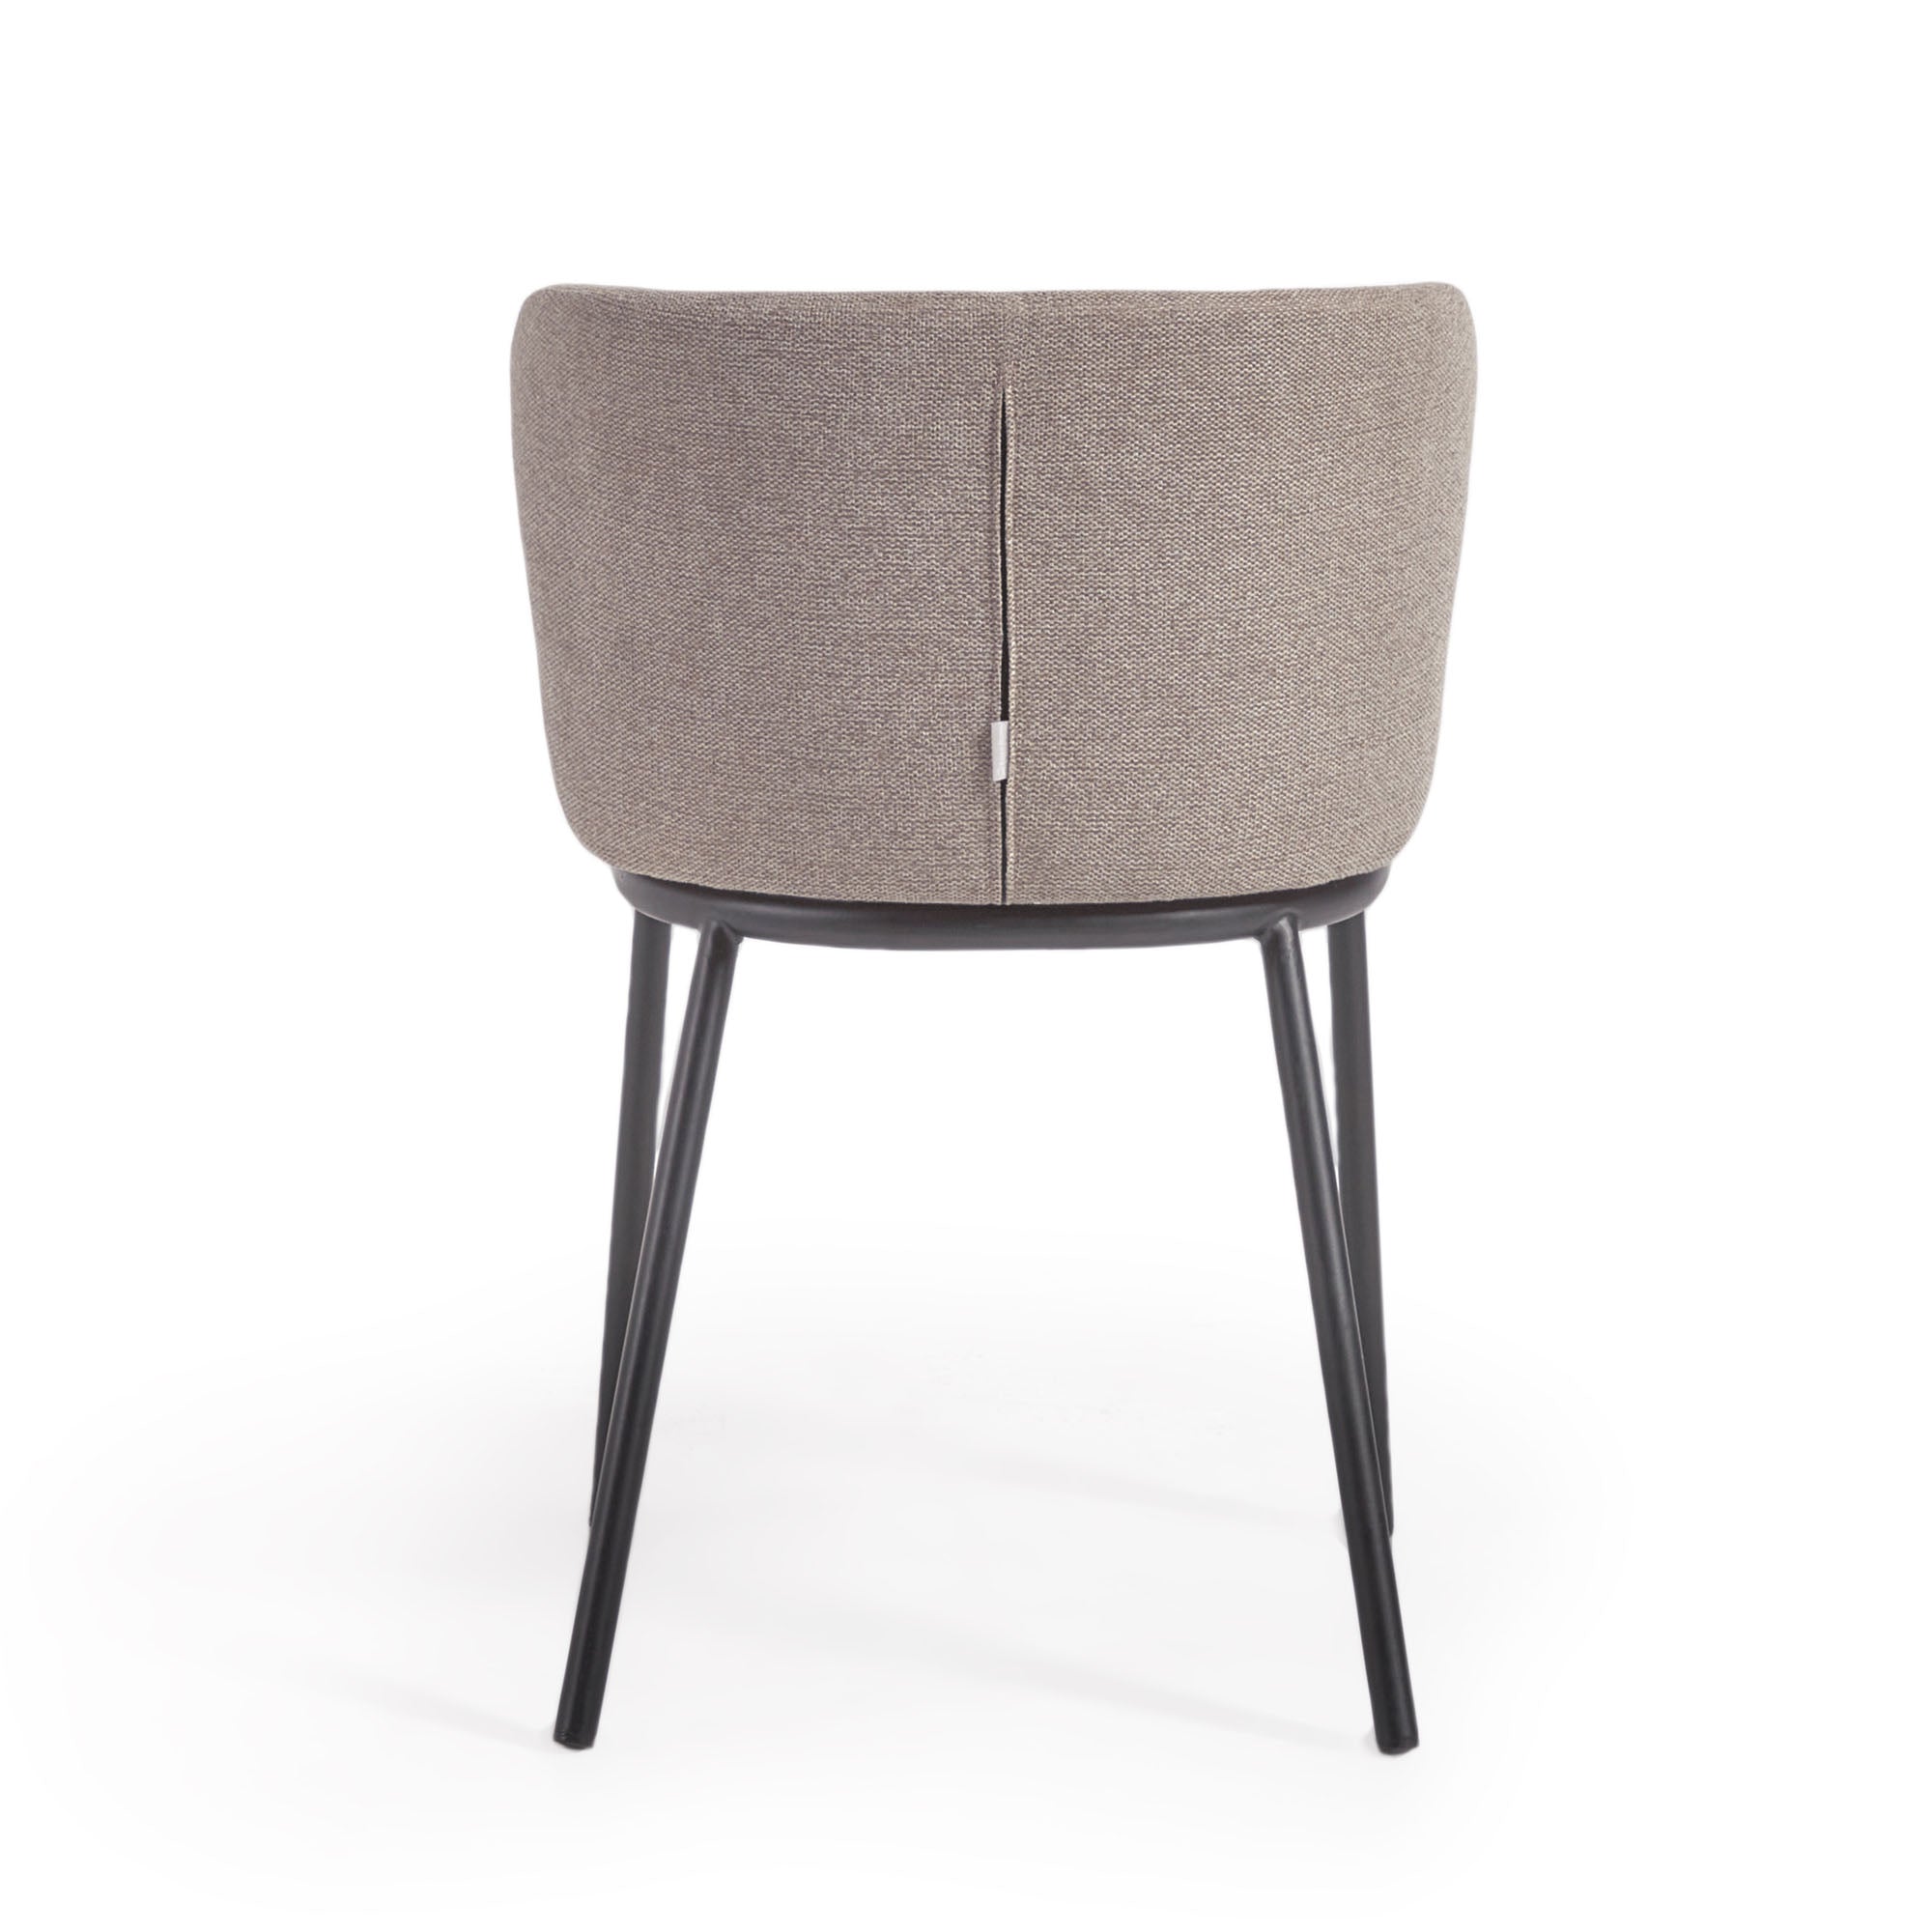 Ciselia chair in light brown chenille and black steel